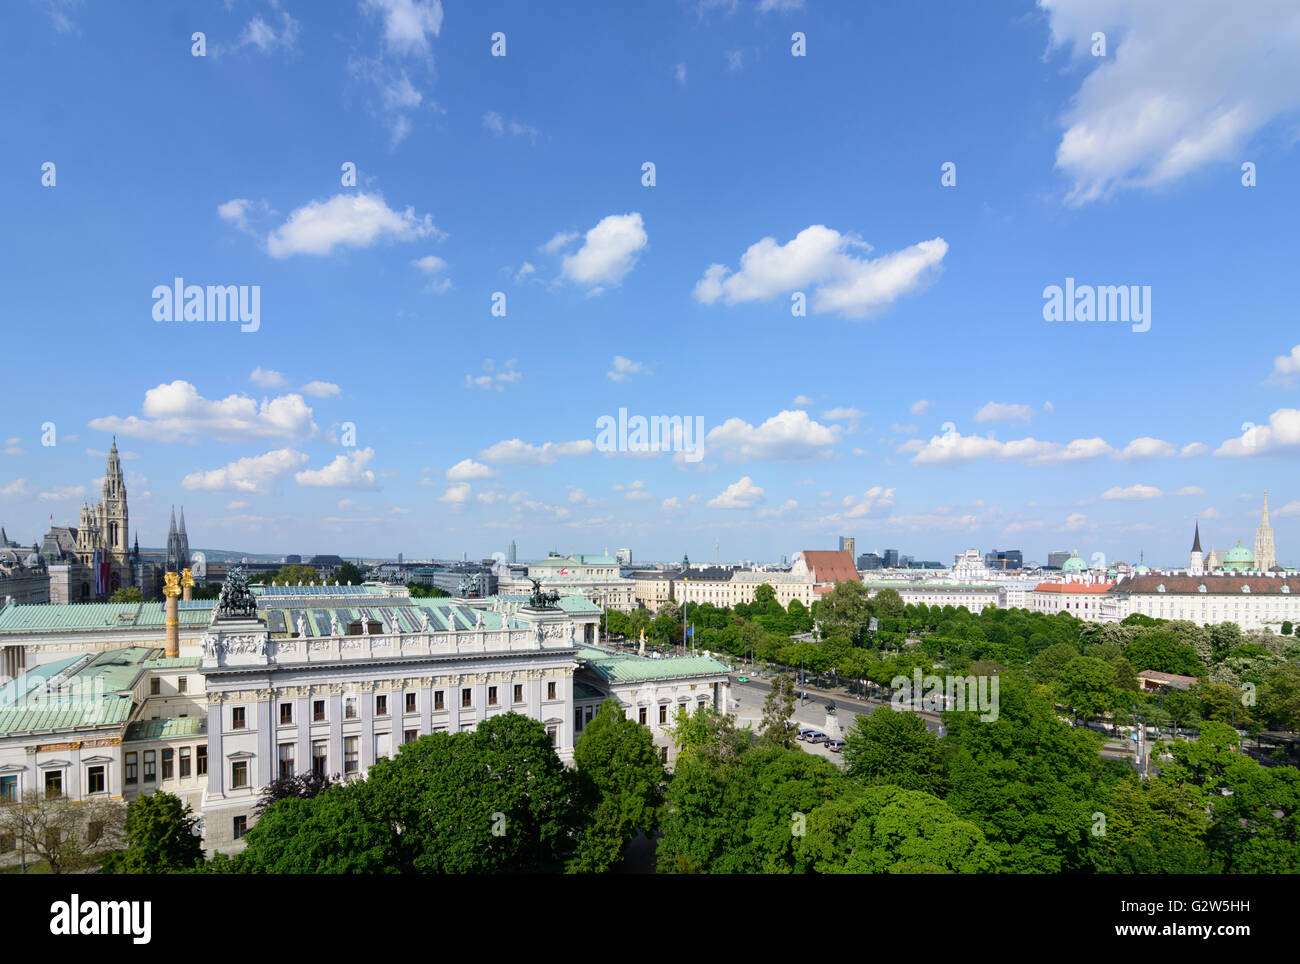 City Hall, Parliament , St. Stephen's Cathedral (left to right ), Austria, Vienna, Wien Stock Photo